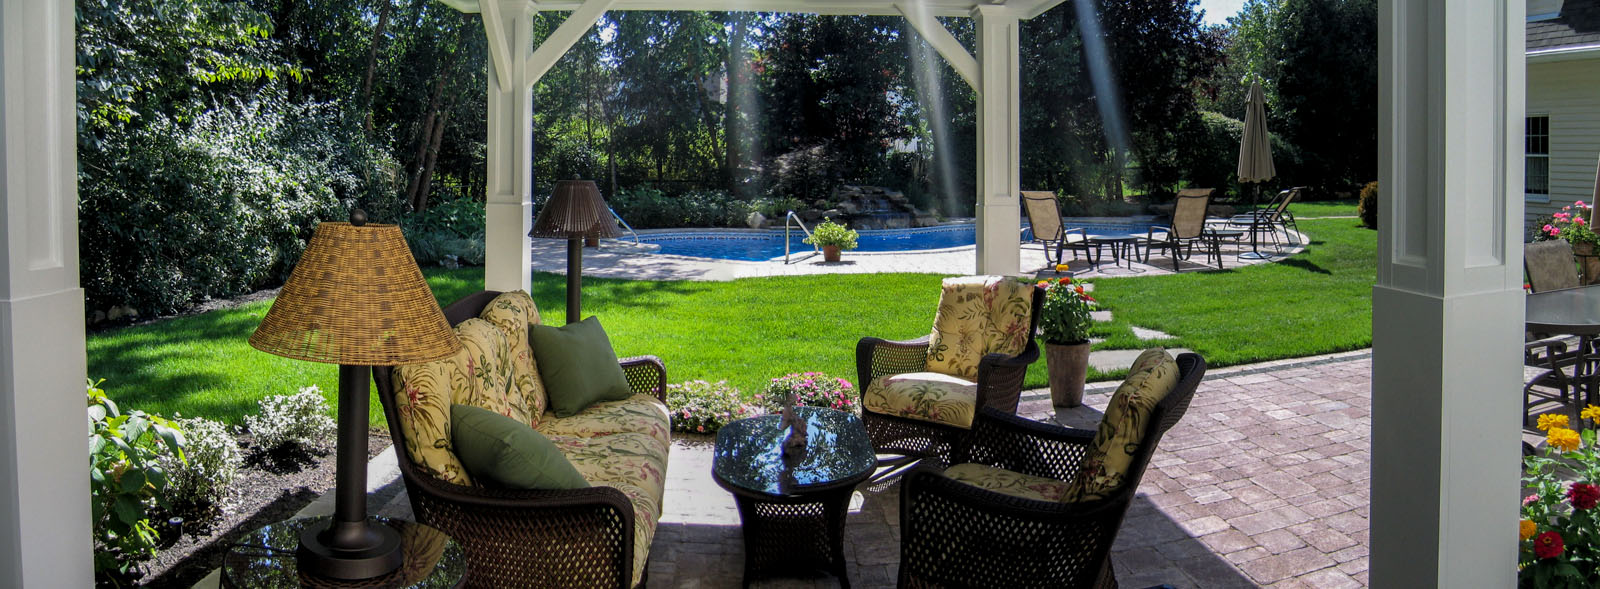 landscape design with patio, pavilion, and swimming pool